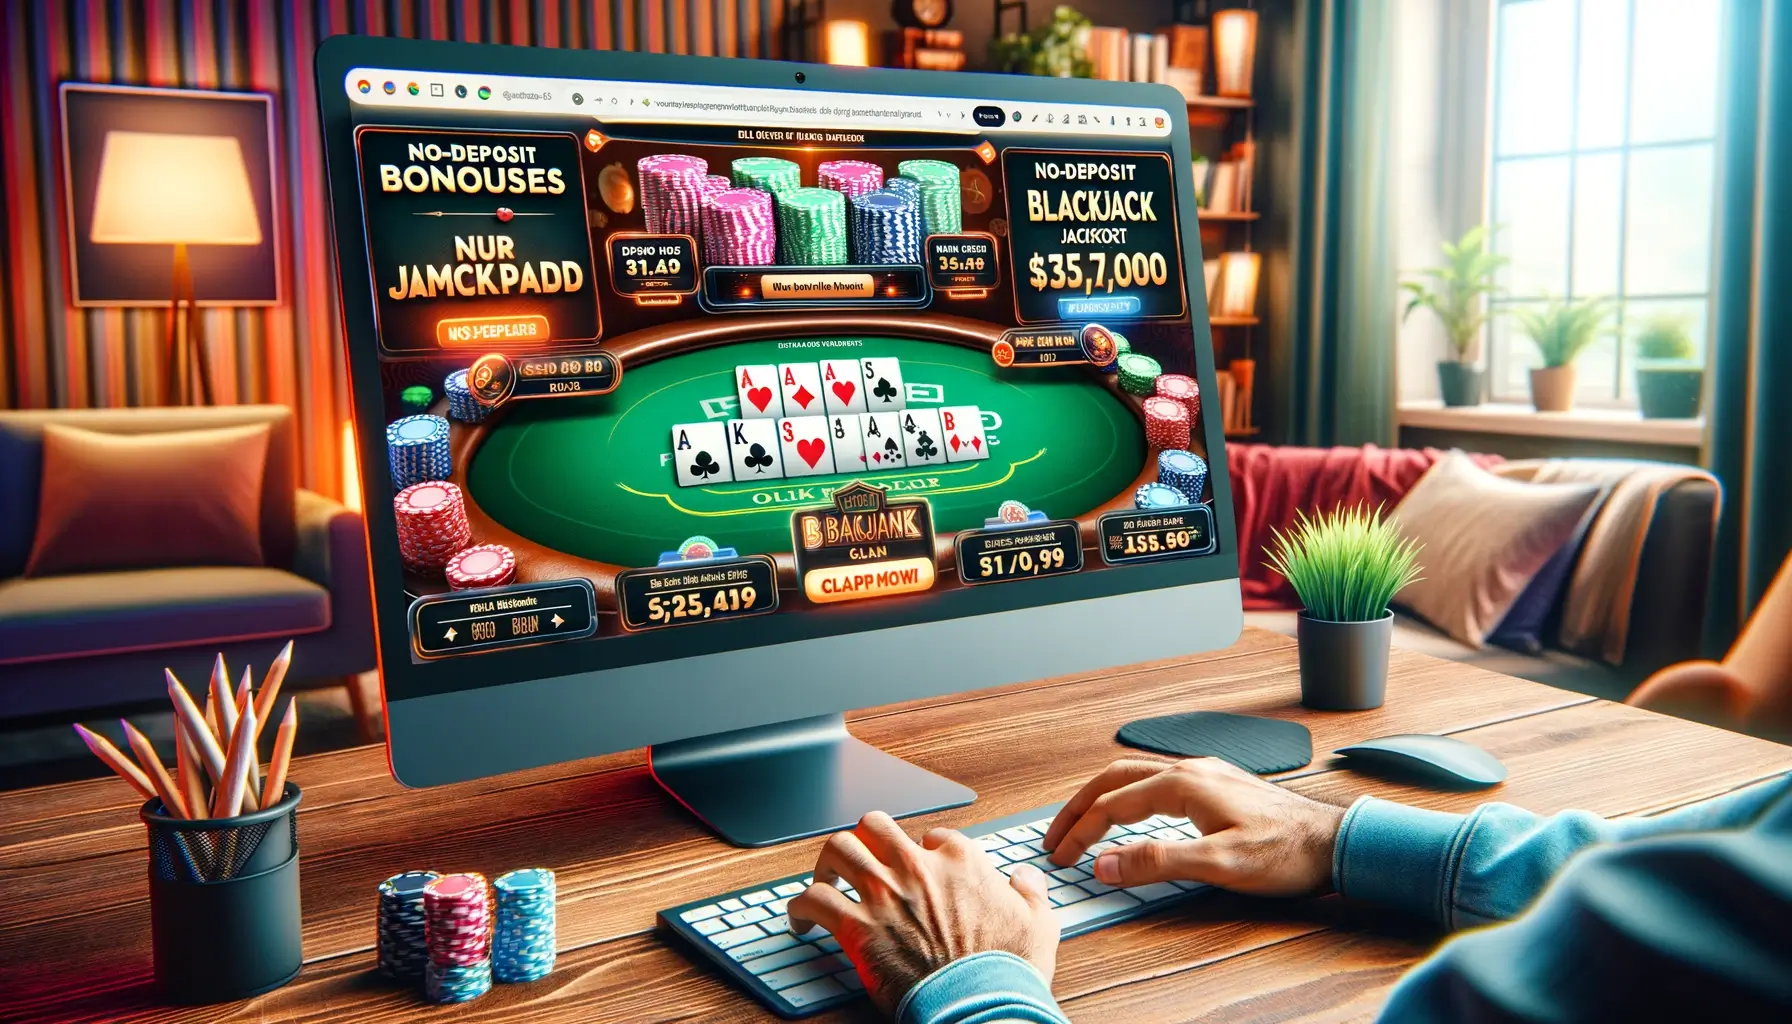 An image showcasing a vibrant online poker interface on a computer screen, with promotional banners for no-deposit bonuses and the Blackjack Jackpot. The screen displays active poker and blackjack games, and the player's hands are visible typing on the keyboard. 